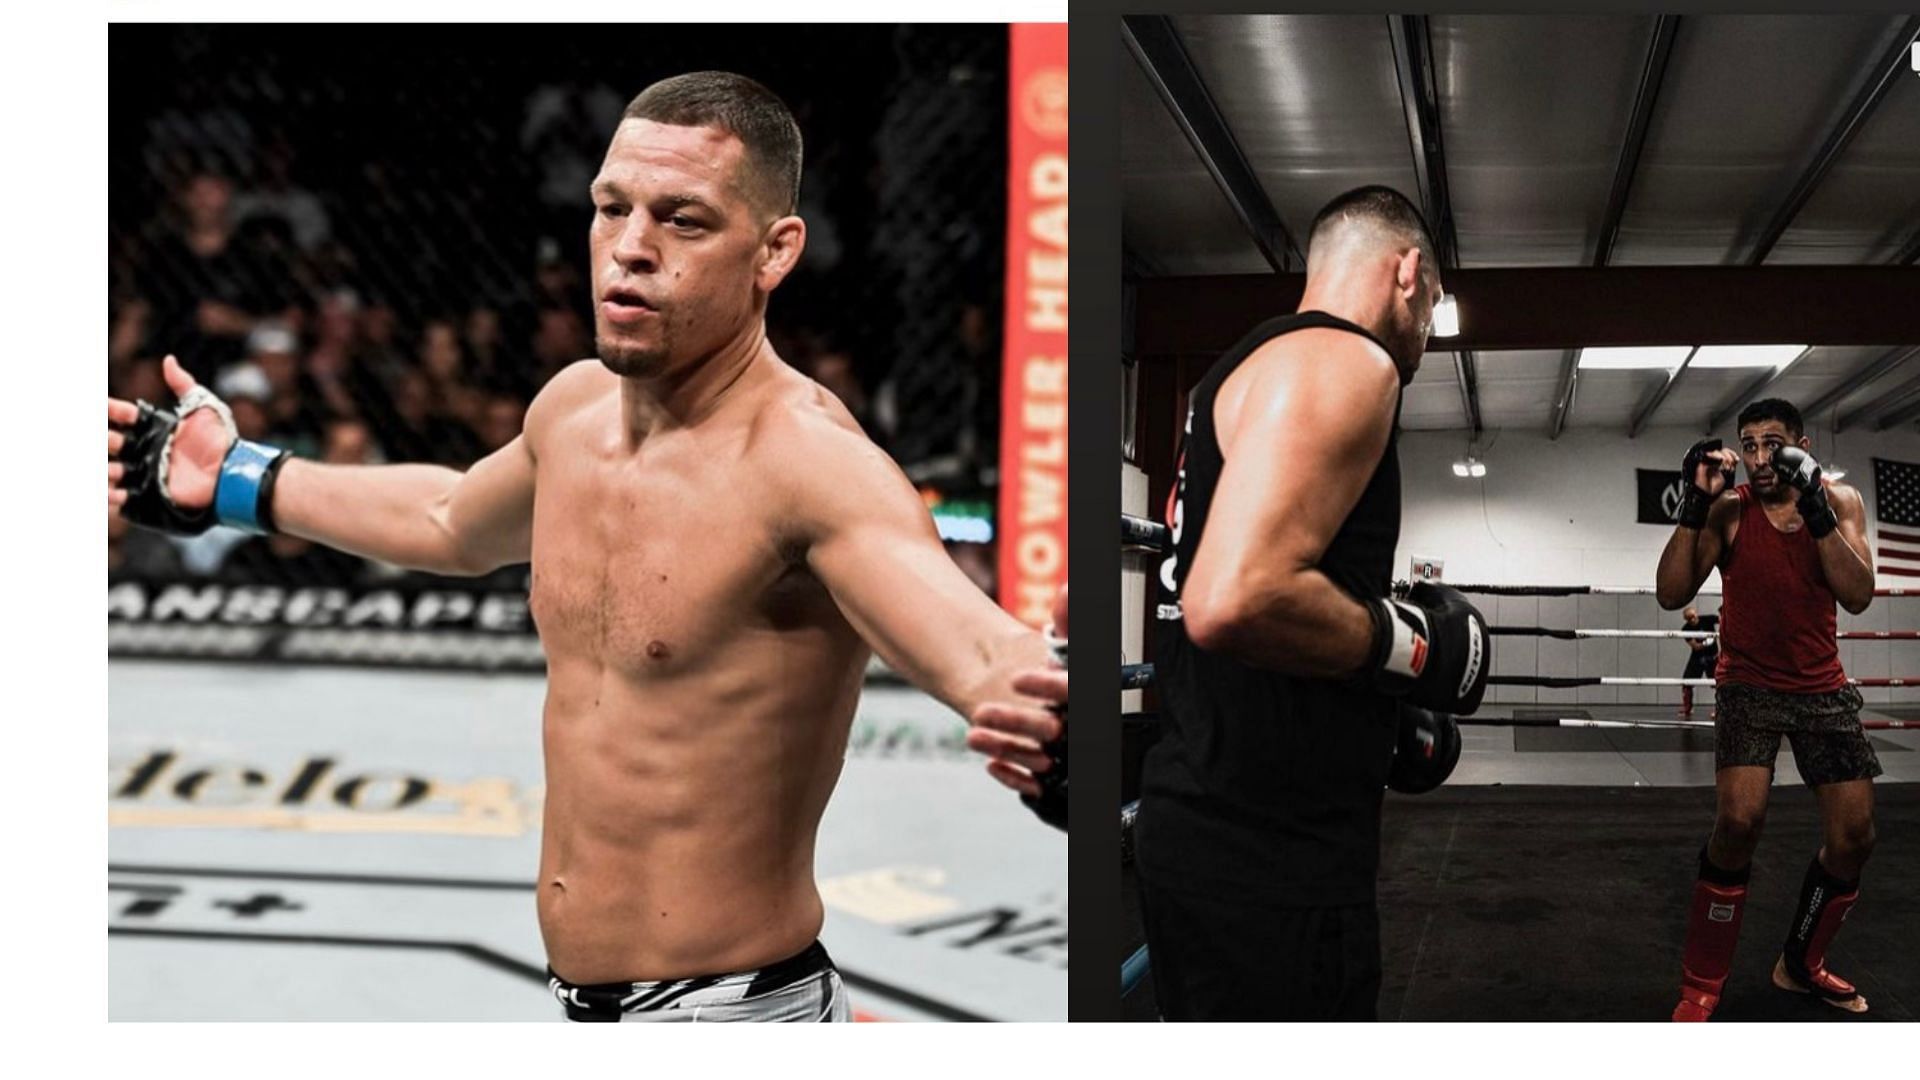 Nate Diaz (left) as well as Nate Diaz and Mikey Singh Hothi (right) [Images courtesy: @natediaz209 on Instagram]